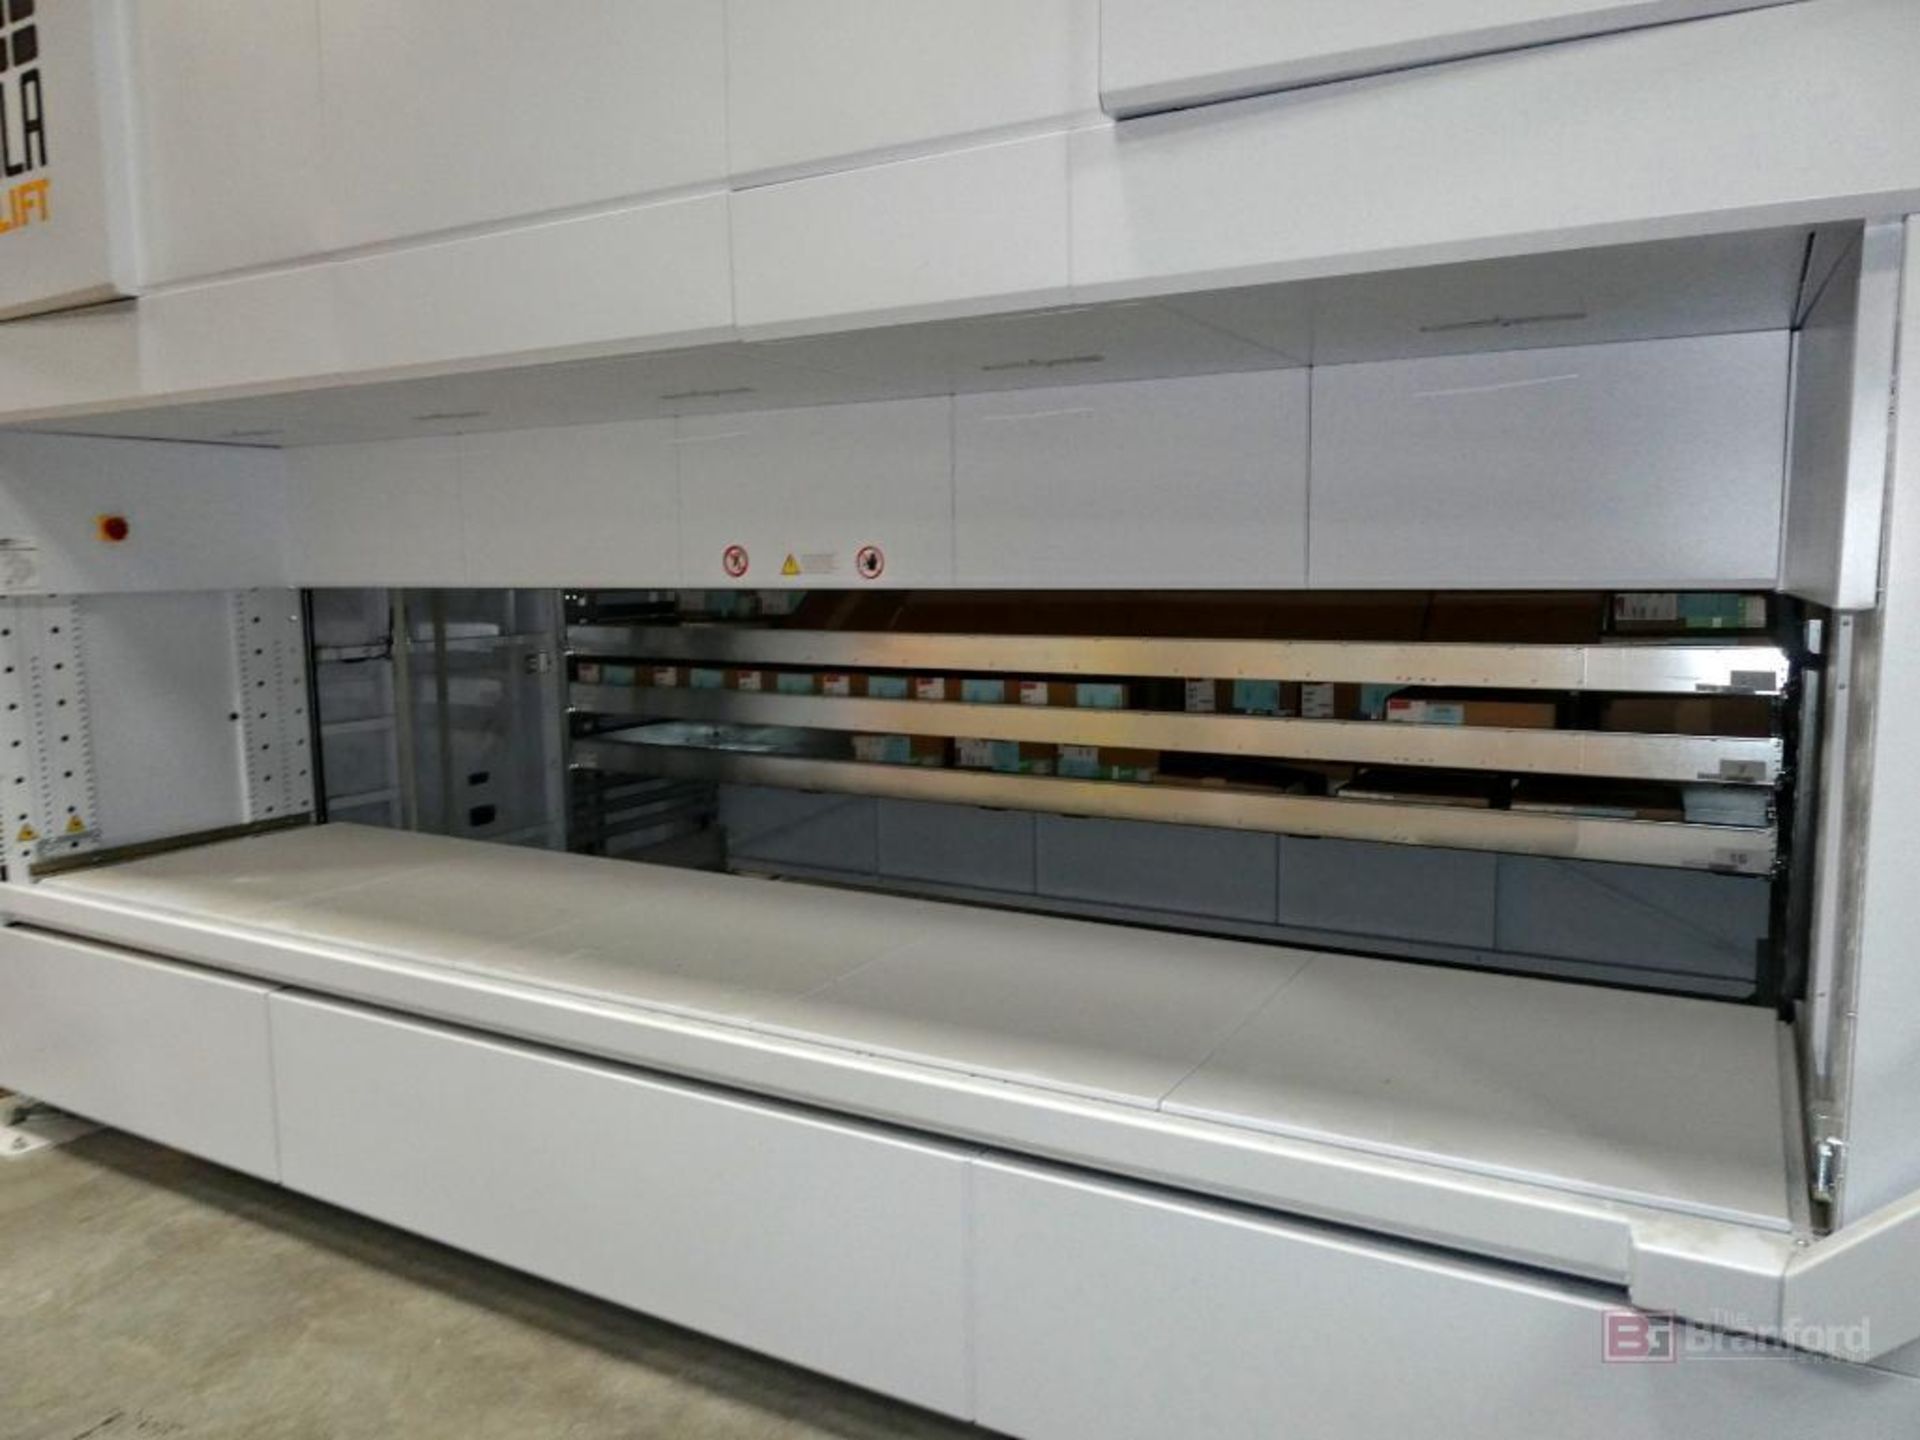 2021 Modula Lift Model ML50D, Automated Vertical Carousel Storage System - Image 4 of 9